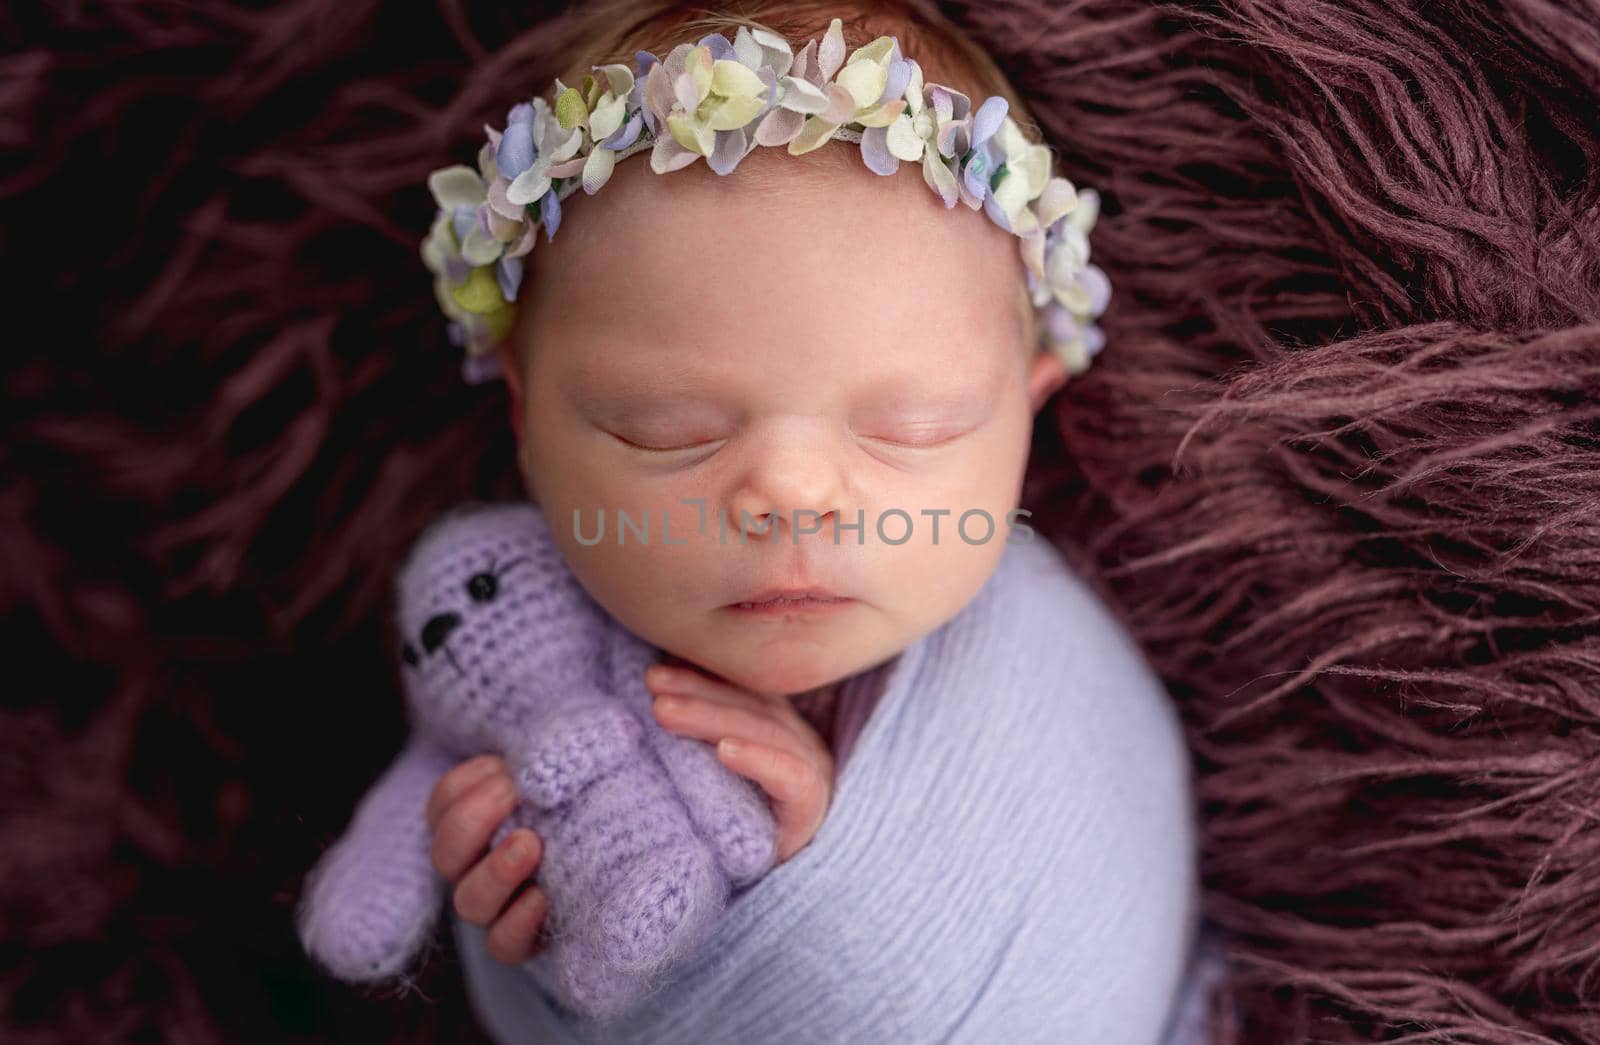 Newborn wearing floral diadem sleeping with knitted toy